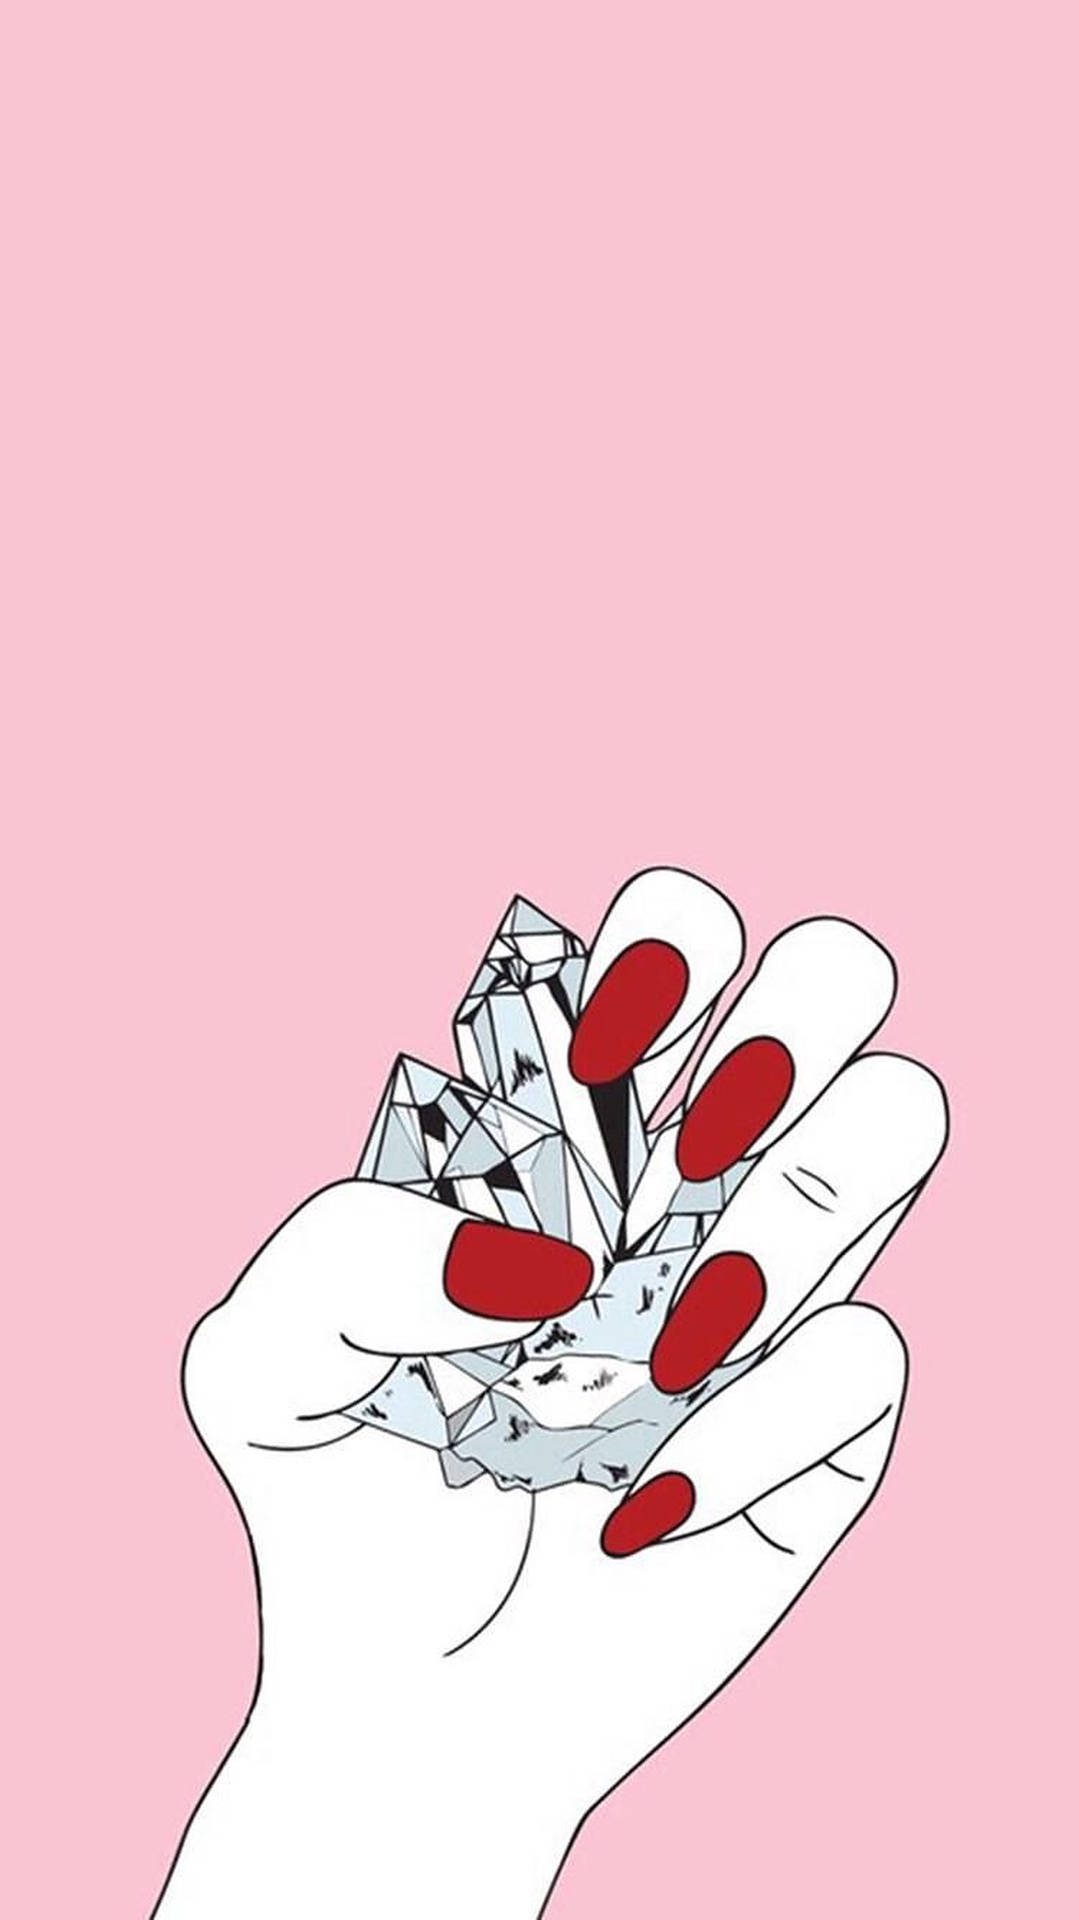 Aesthetic Nails Wallpapers